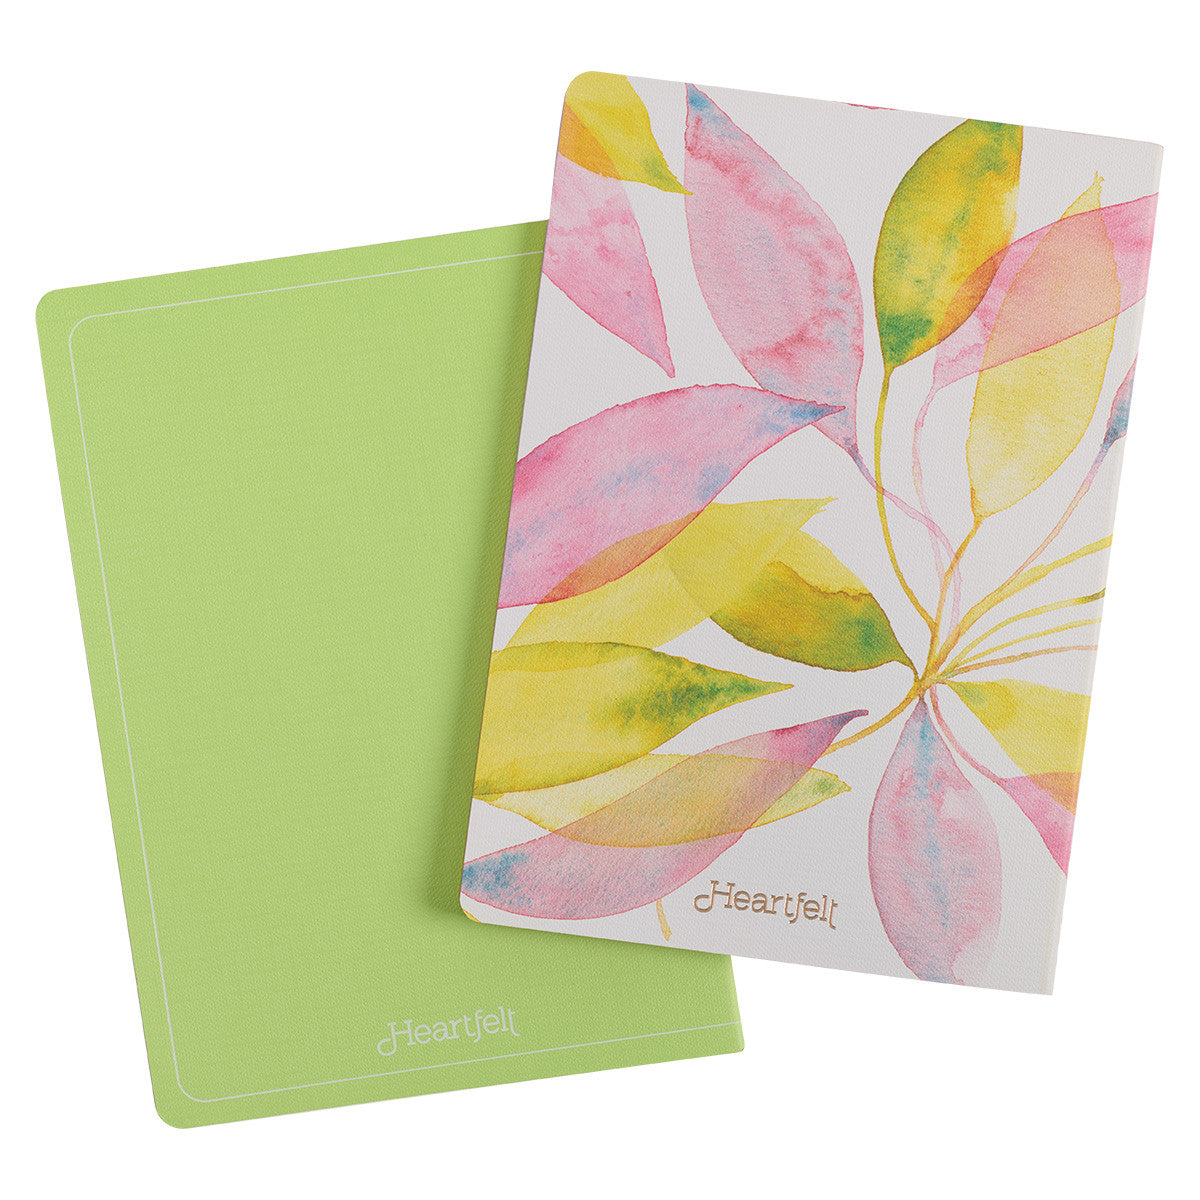 Courage Dear Heart Citrus Leaves Notebook Set - The Christian Gift Company